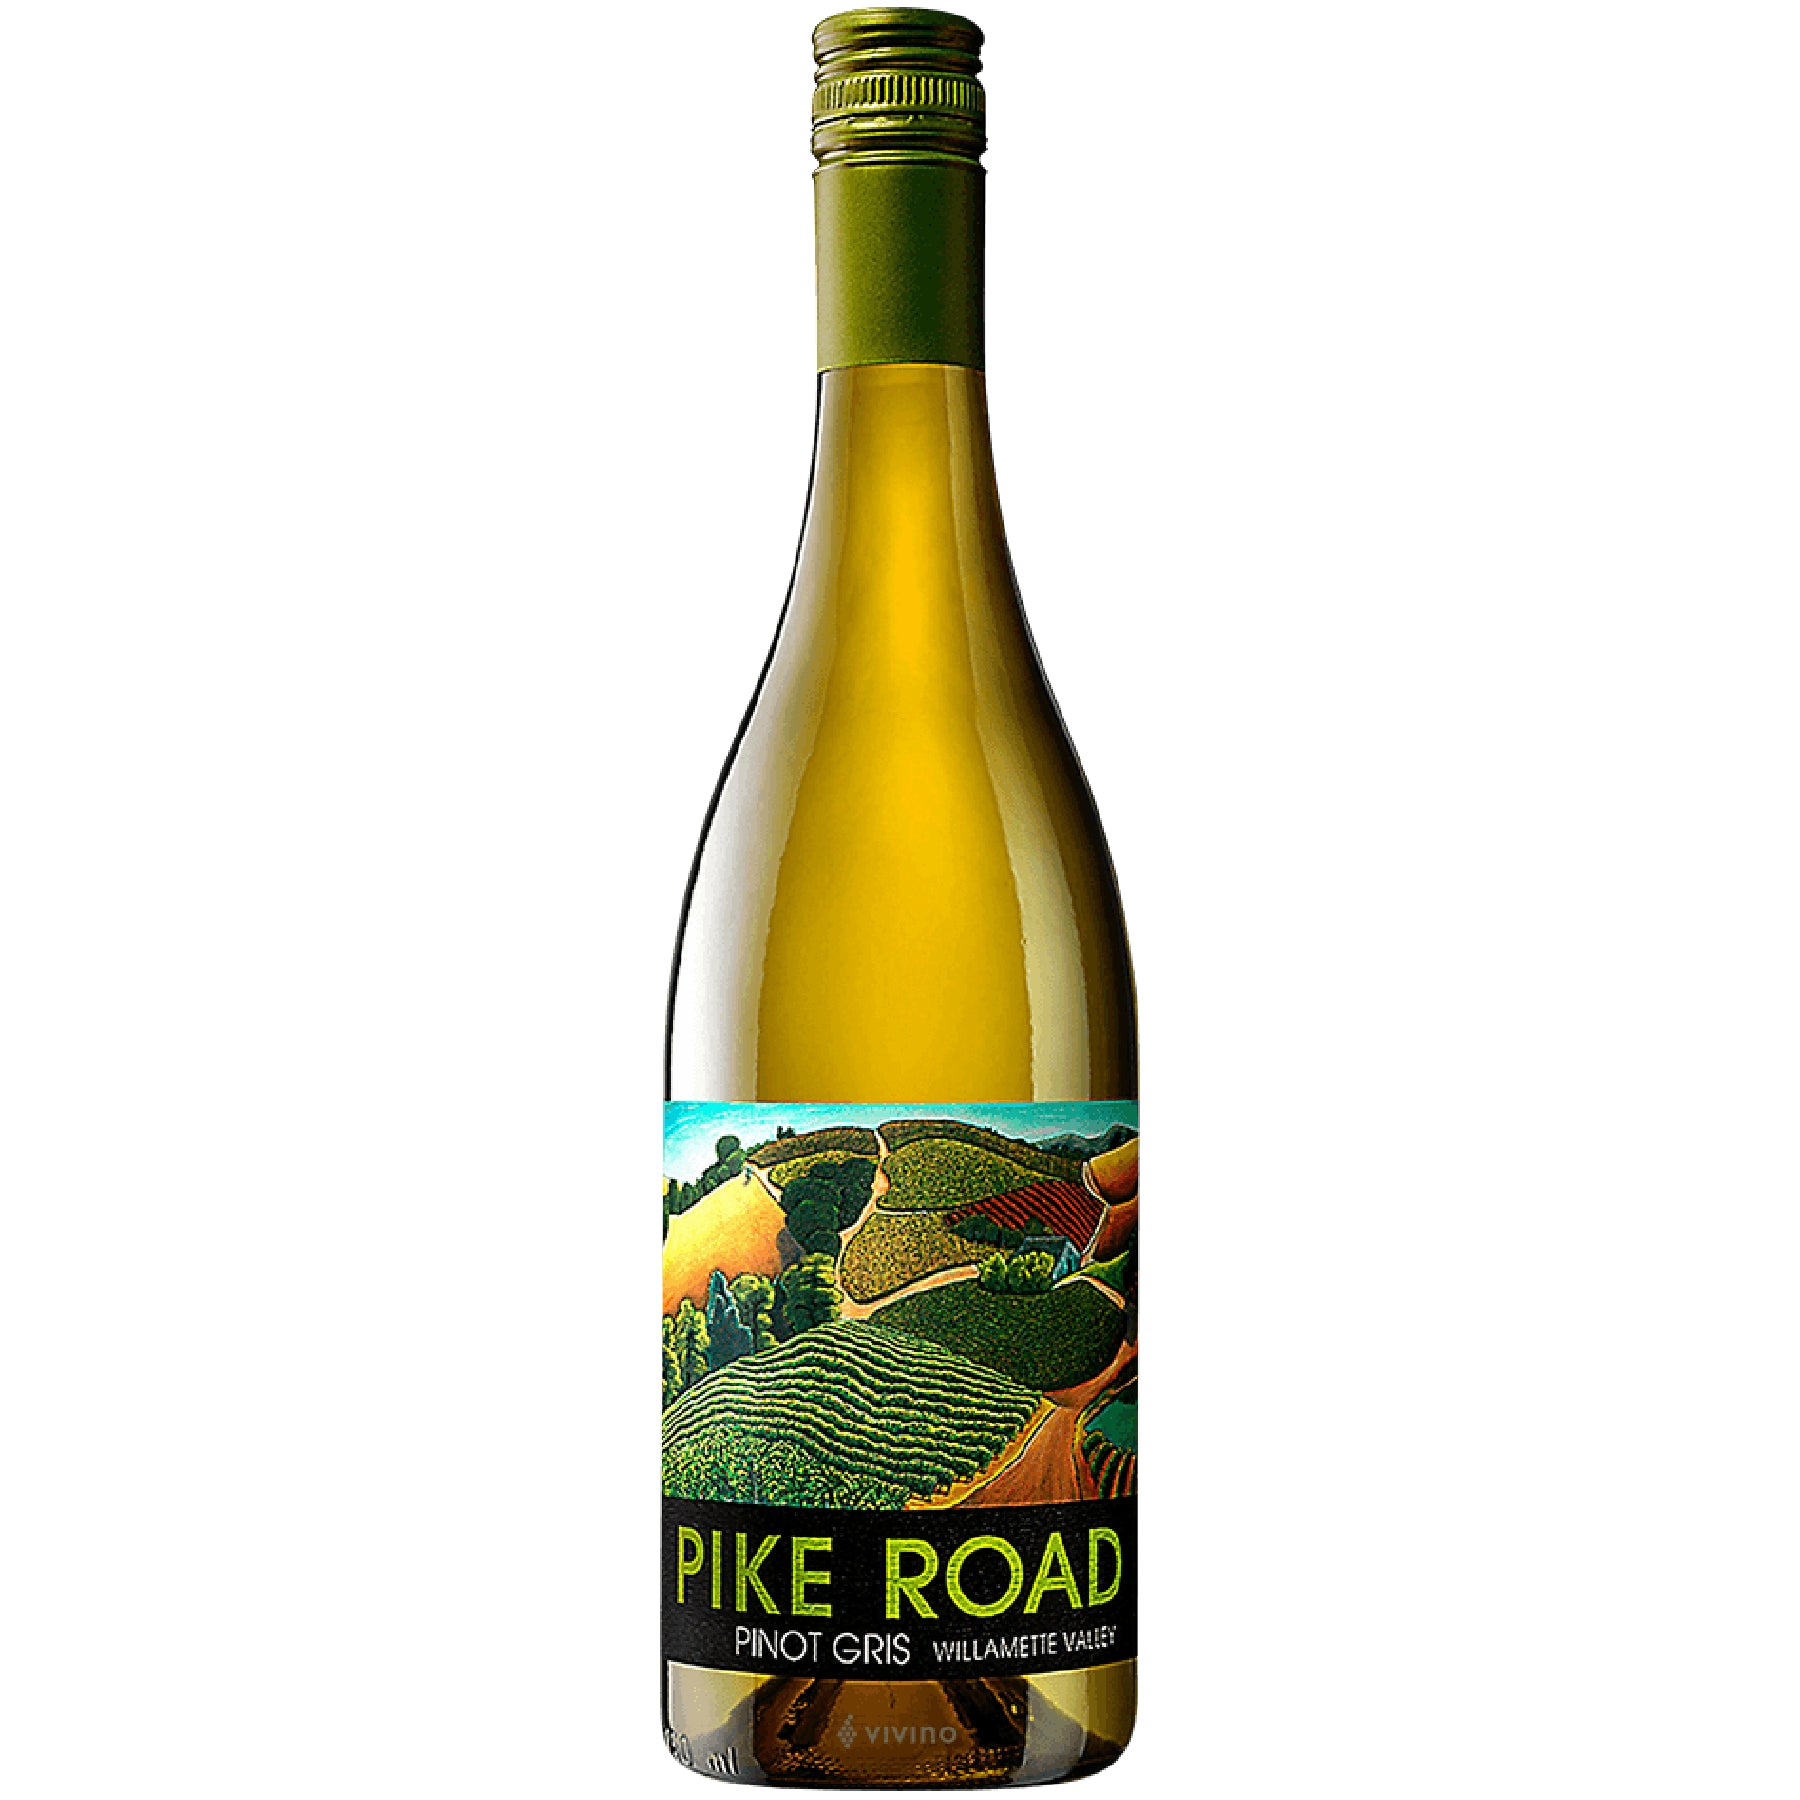 Pike Road Pinot Gris 2019